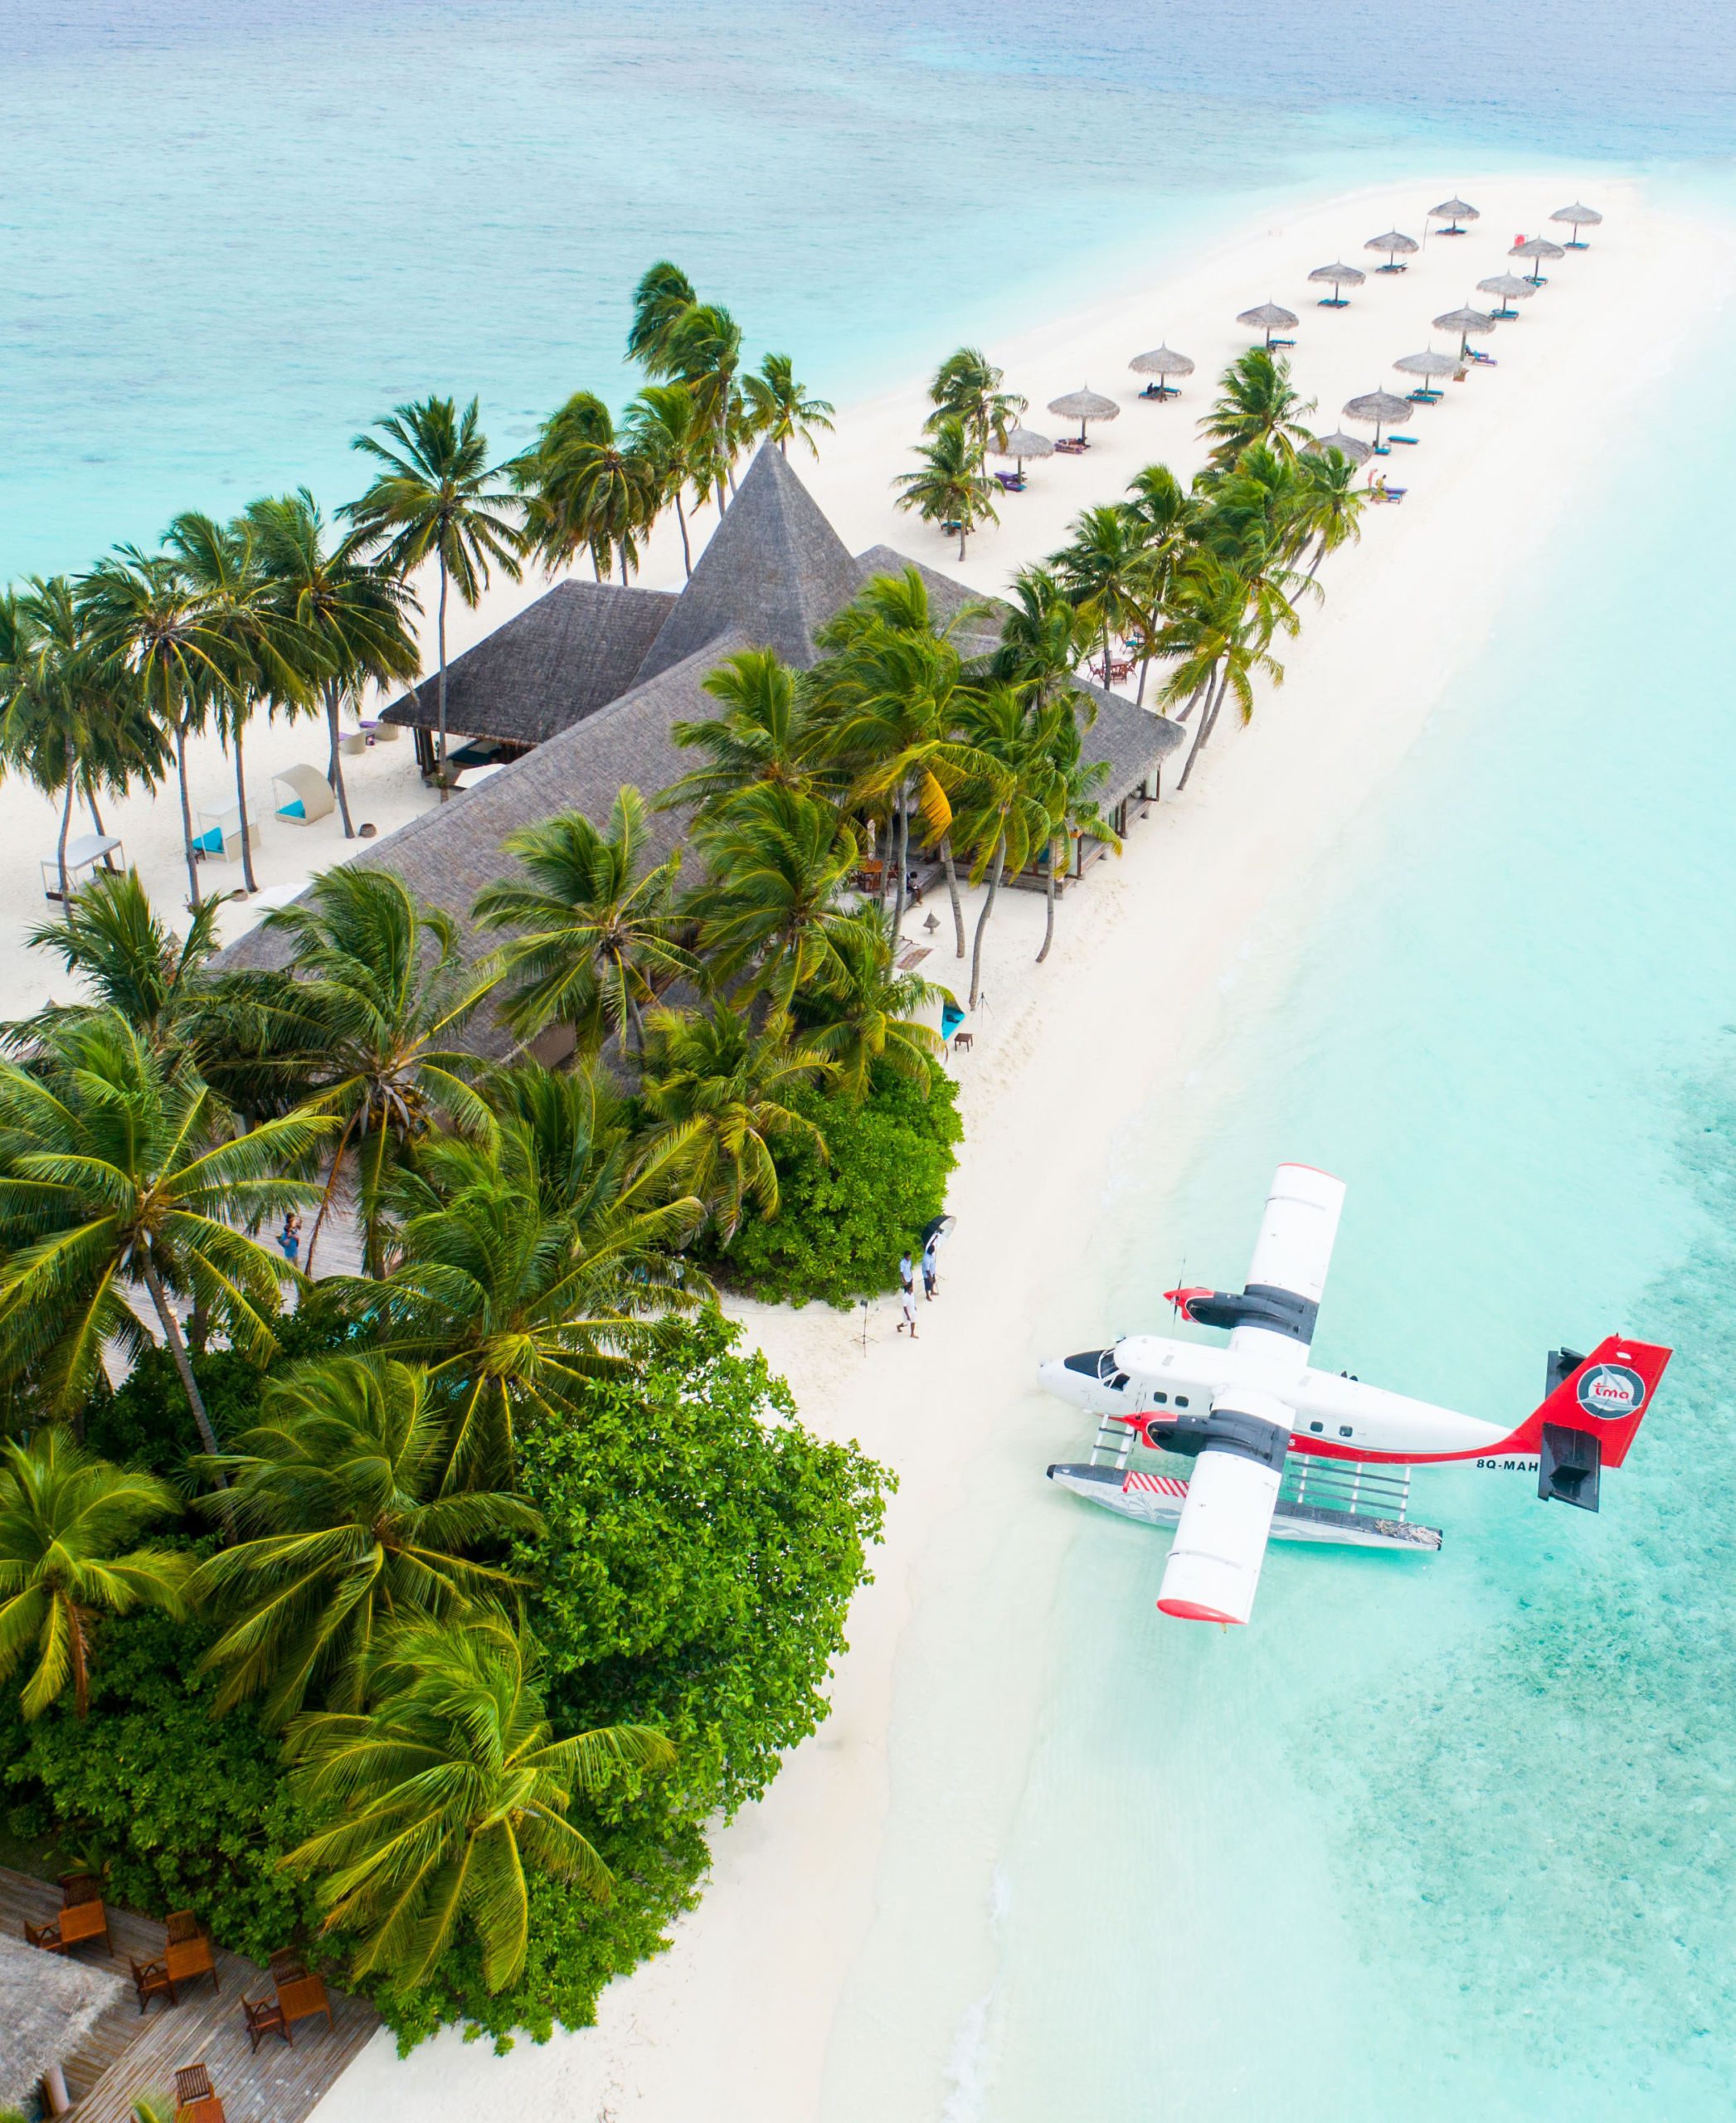 Flying to the Maldives